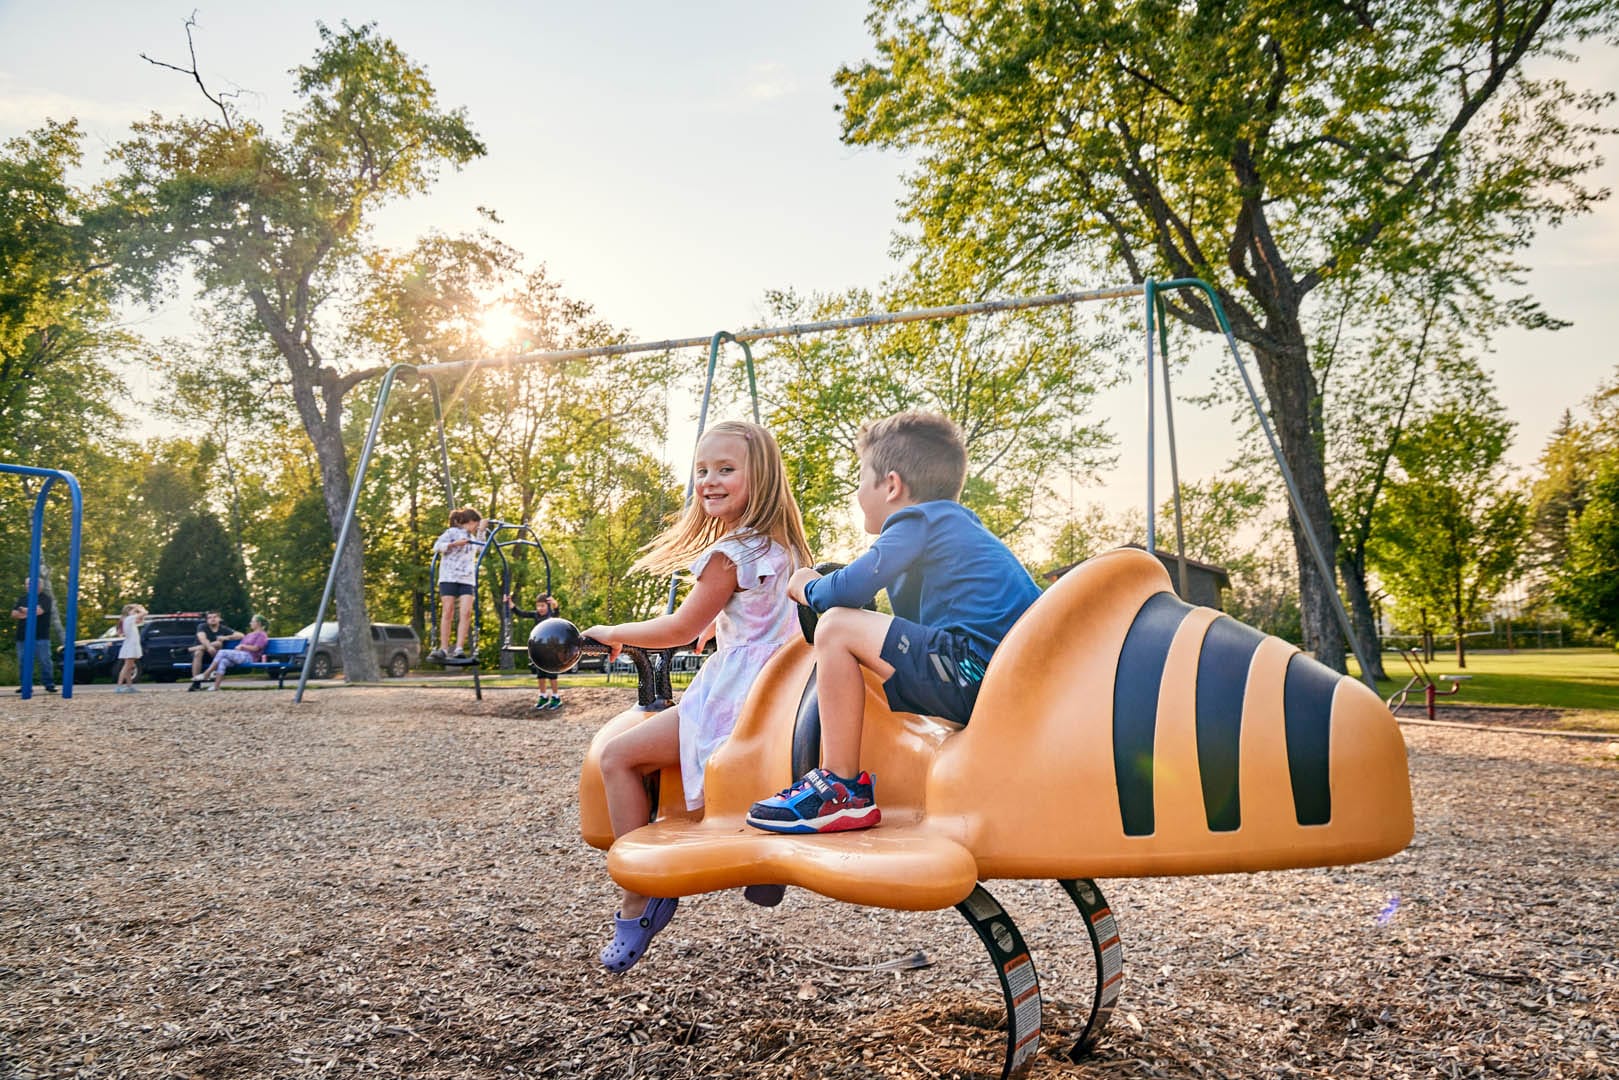 A young boy and a young girl playing on a large bumblebee at a park. There is a swing set behind them.